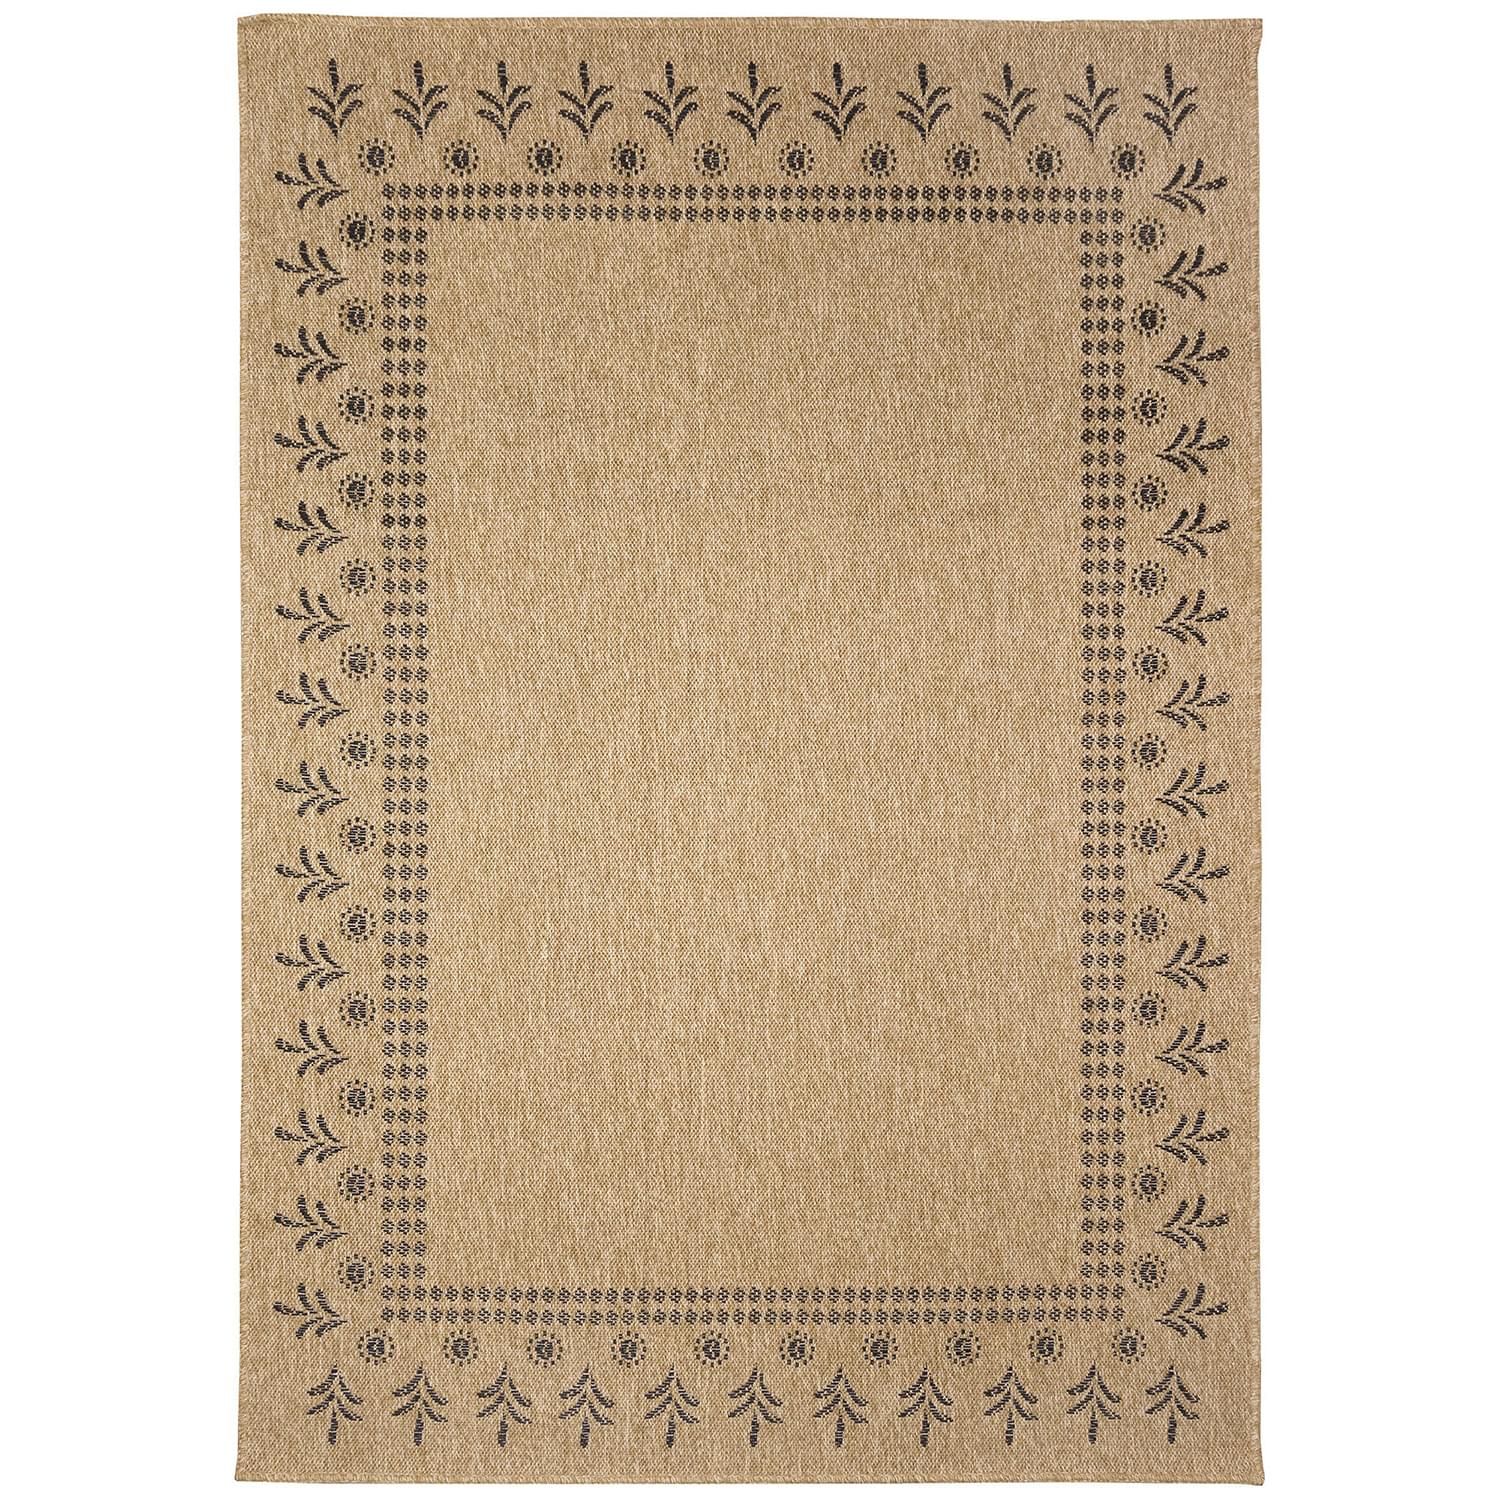 Liora Manne Sahara Low Profile  Easy Care Woven Weather Resistant Rug- Block Print Border Natural  Product Image